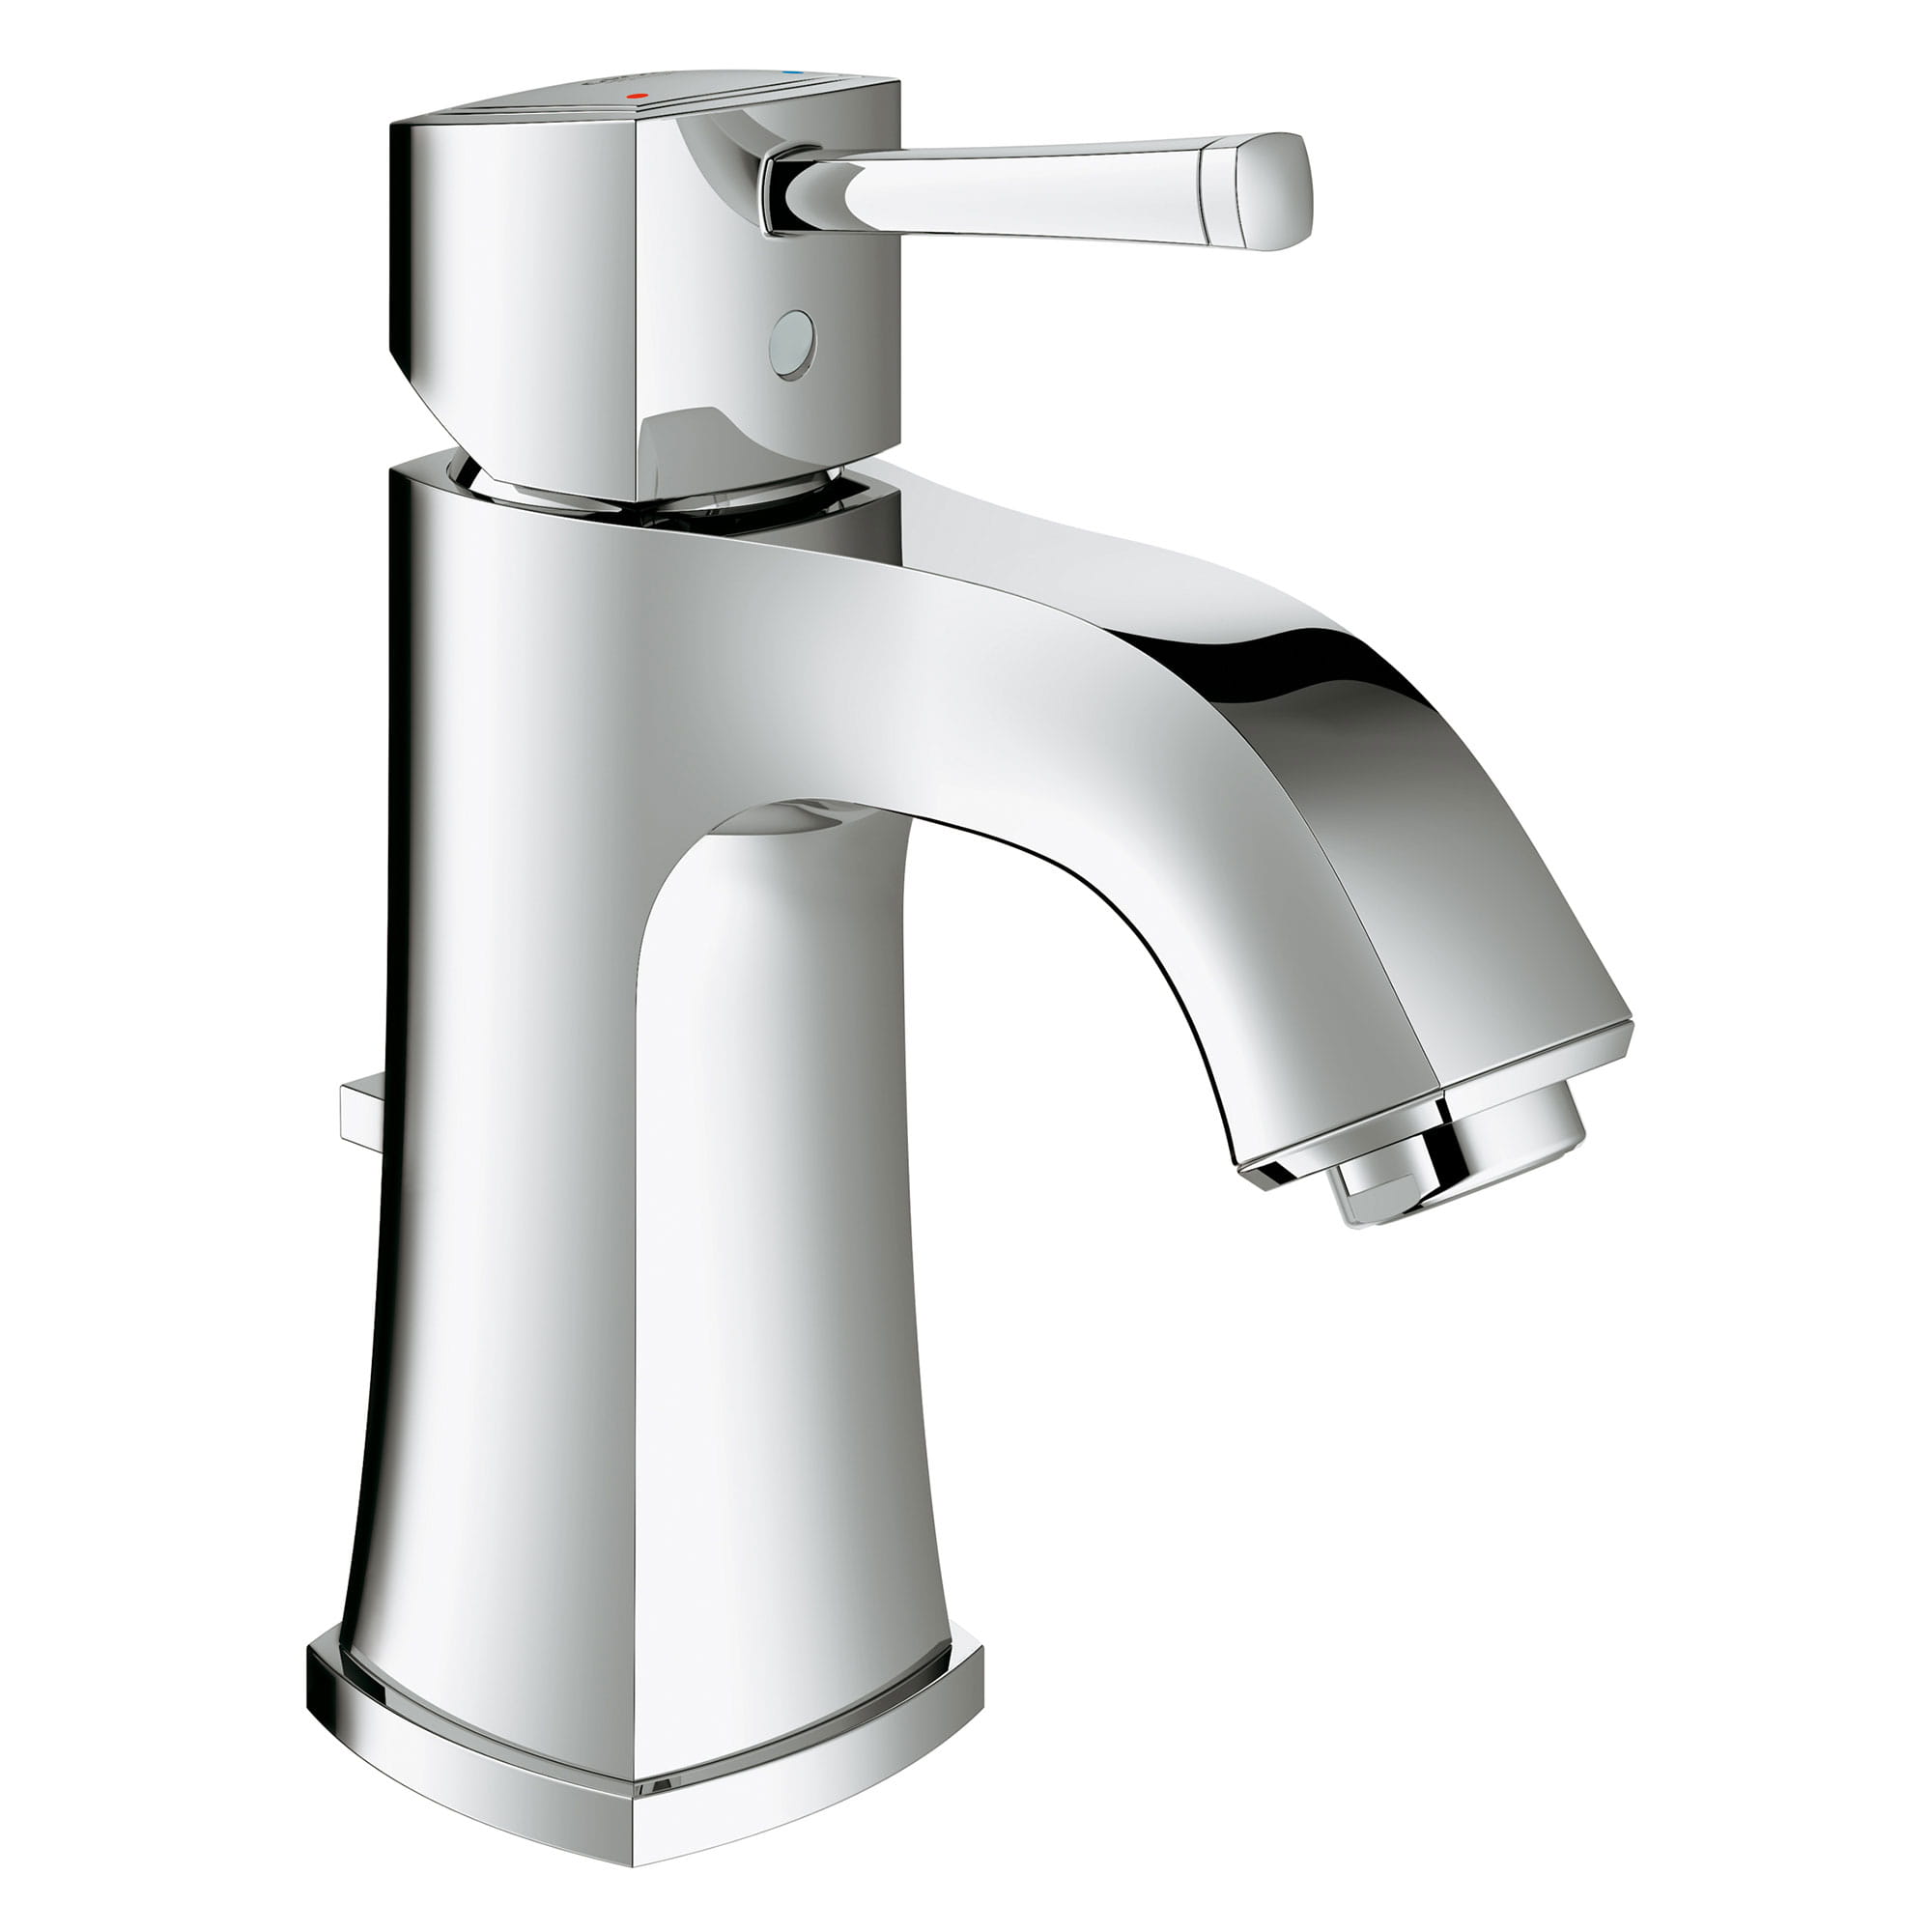 SINGLE HOLE SINGLE-HANDLE M-SIZE BATHROOM FAUCET 1.5 GPM-related